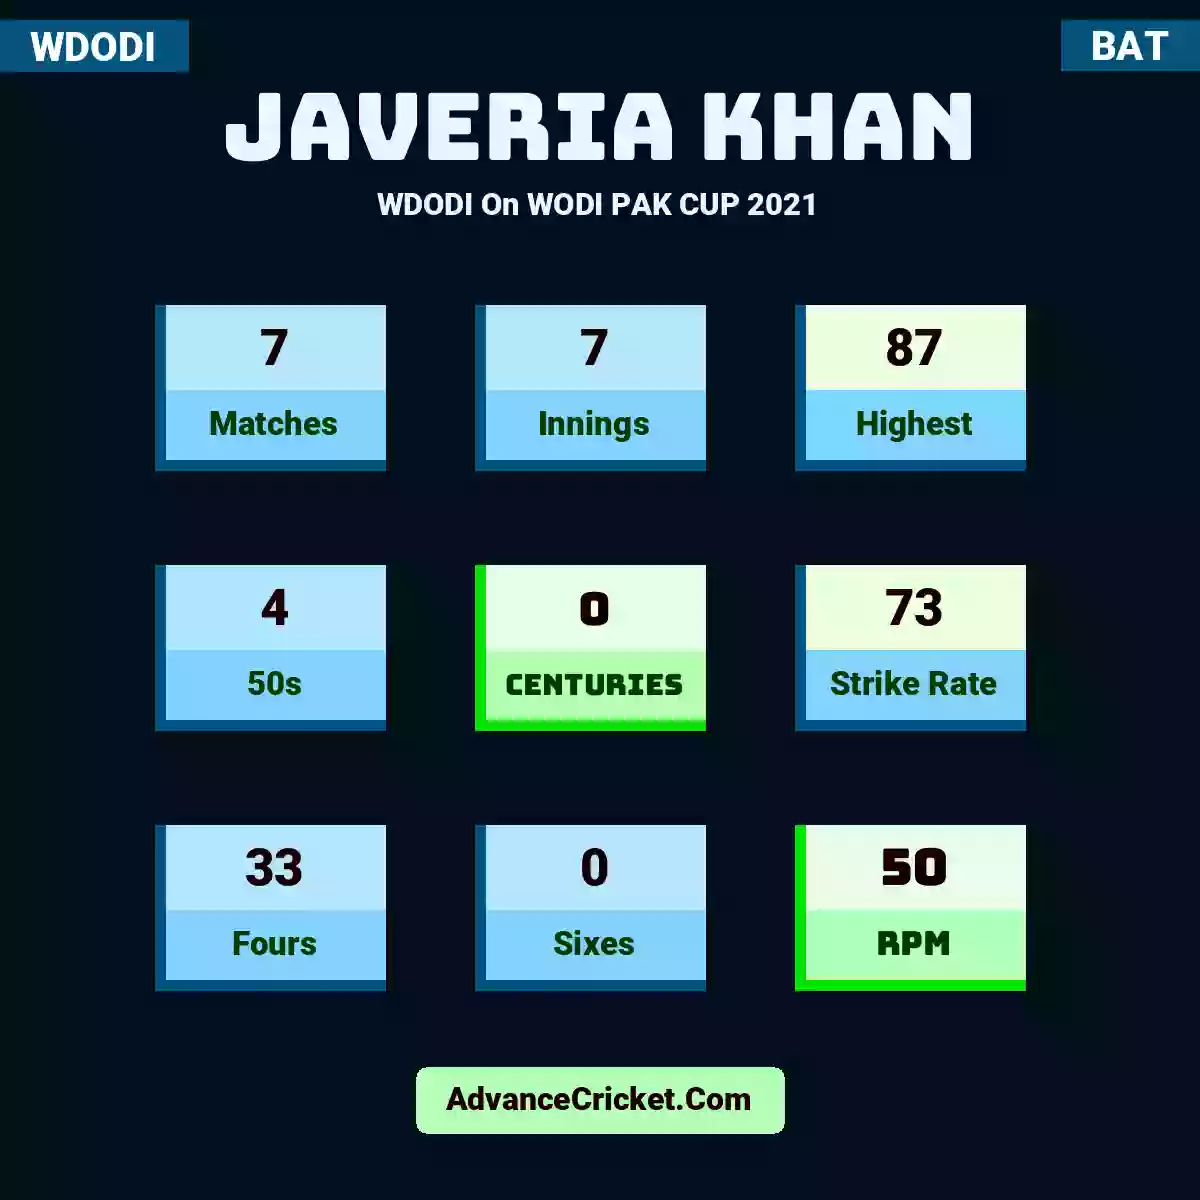 Javeria Khan WDODI  On WODI PAK CUP 2021, Javeria Khan played 7 matches, scored 87 runs as highest, 4 half-centuries, and 0 centuries, with a strike rate of 73. J.Khan hit 33 fours and 0 sixes, with an RPM of 50.